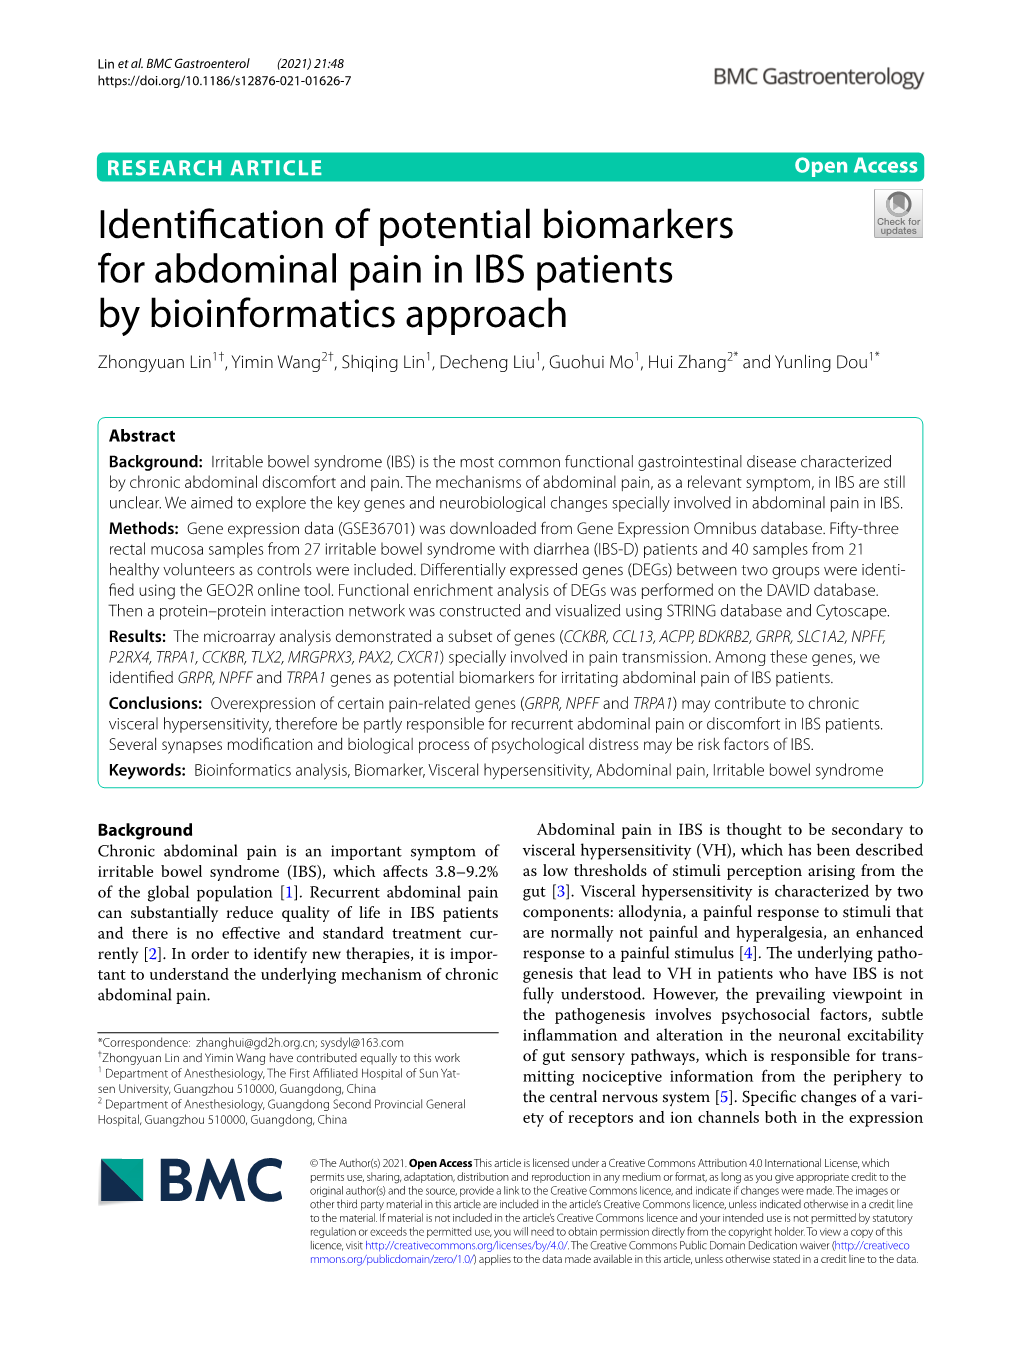 Identification of Potential Biomarkers for Abdominal Pain in IBS Patients by Bioinformatics Approach